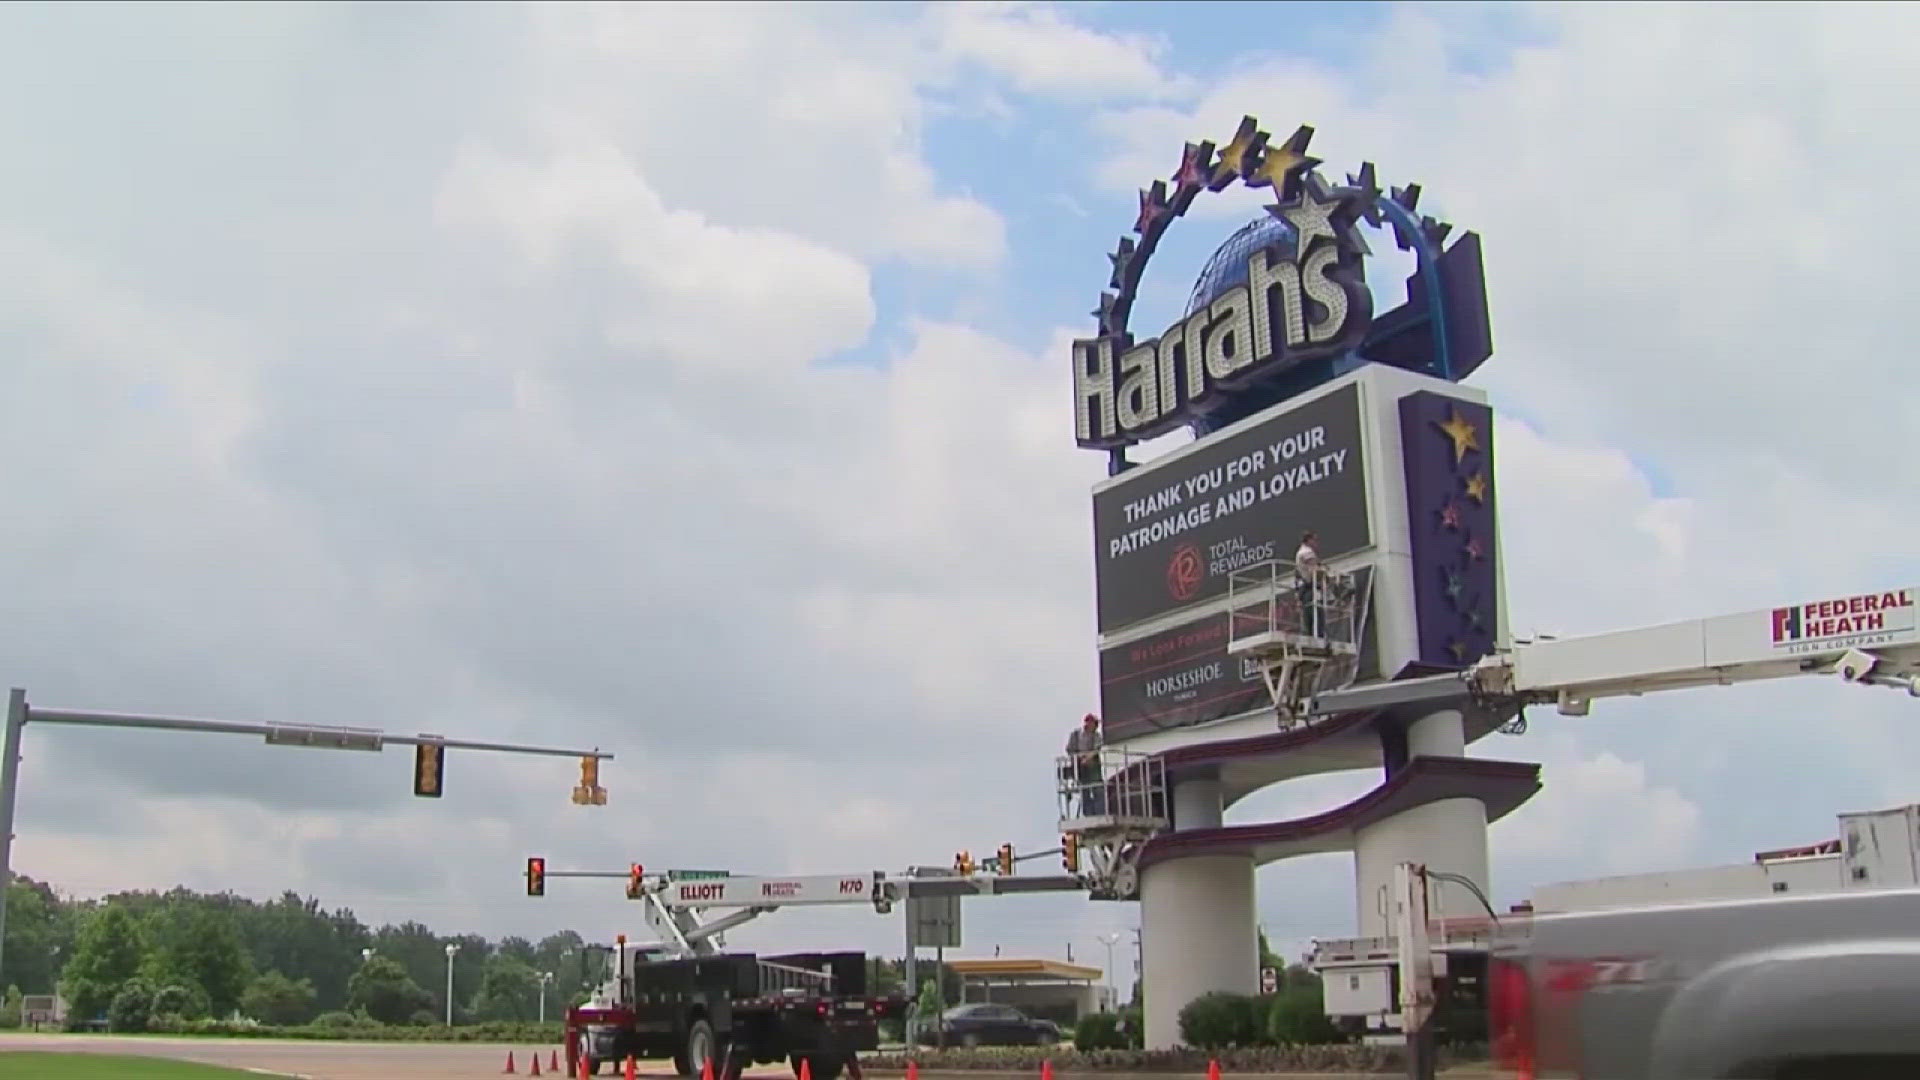 Local leaders in Tunica County are sounding off against a proposal that could house unaccompanied migrant children at the former Harrah’s casino site.